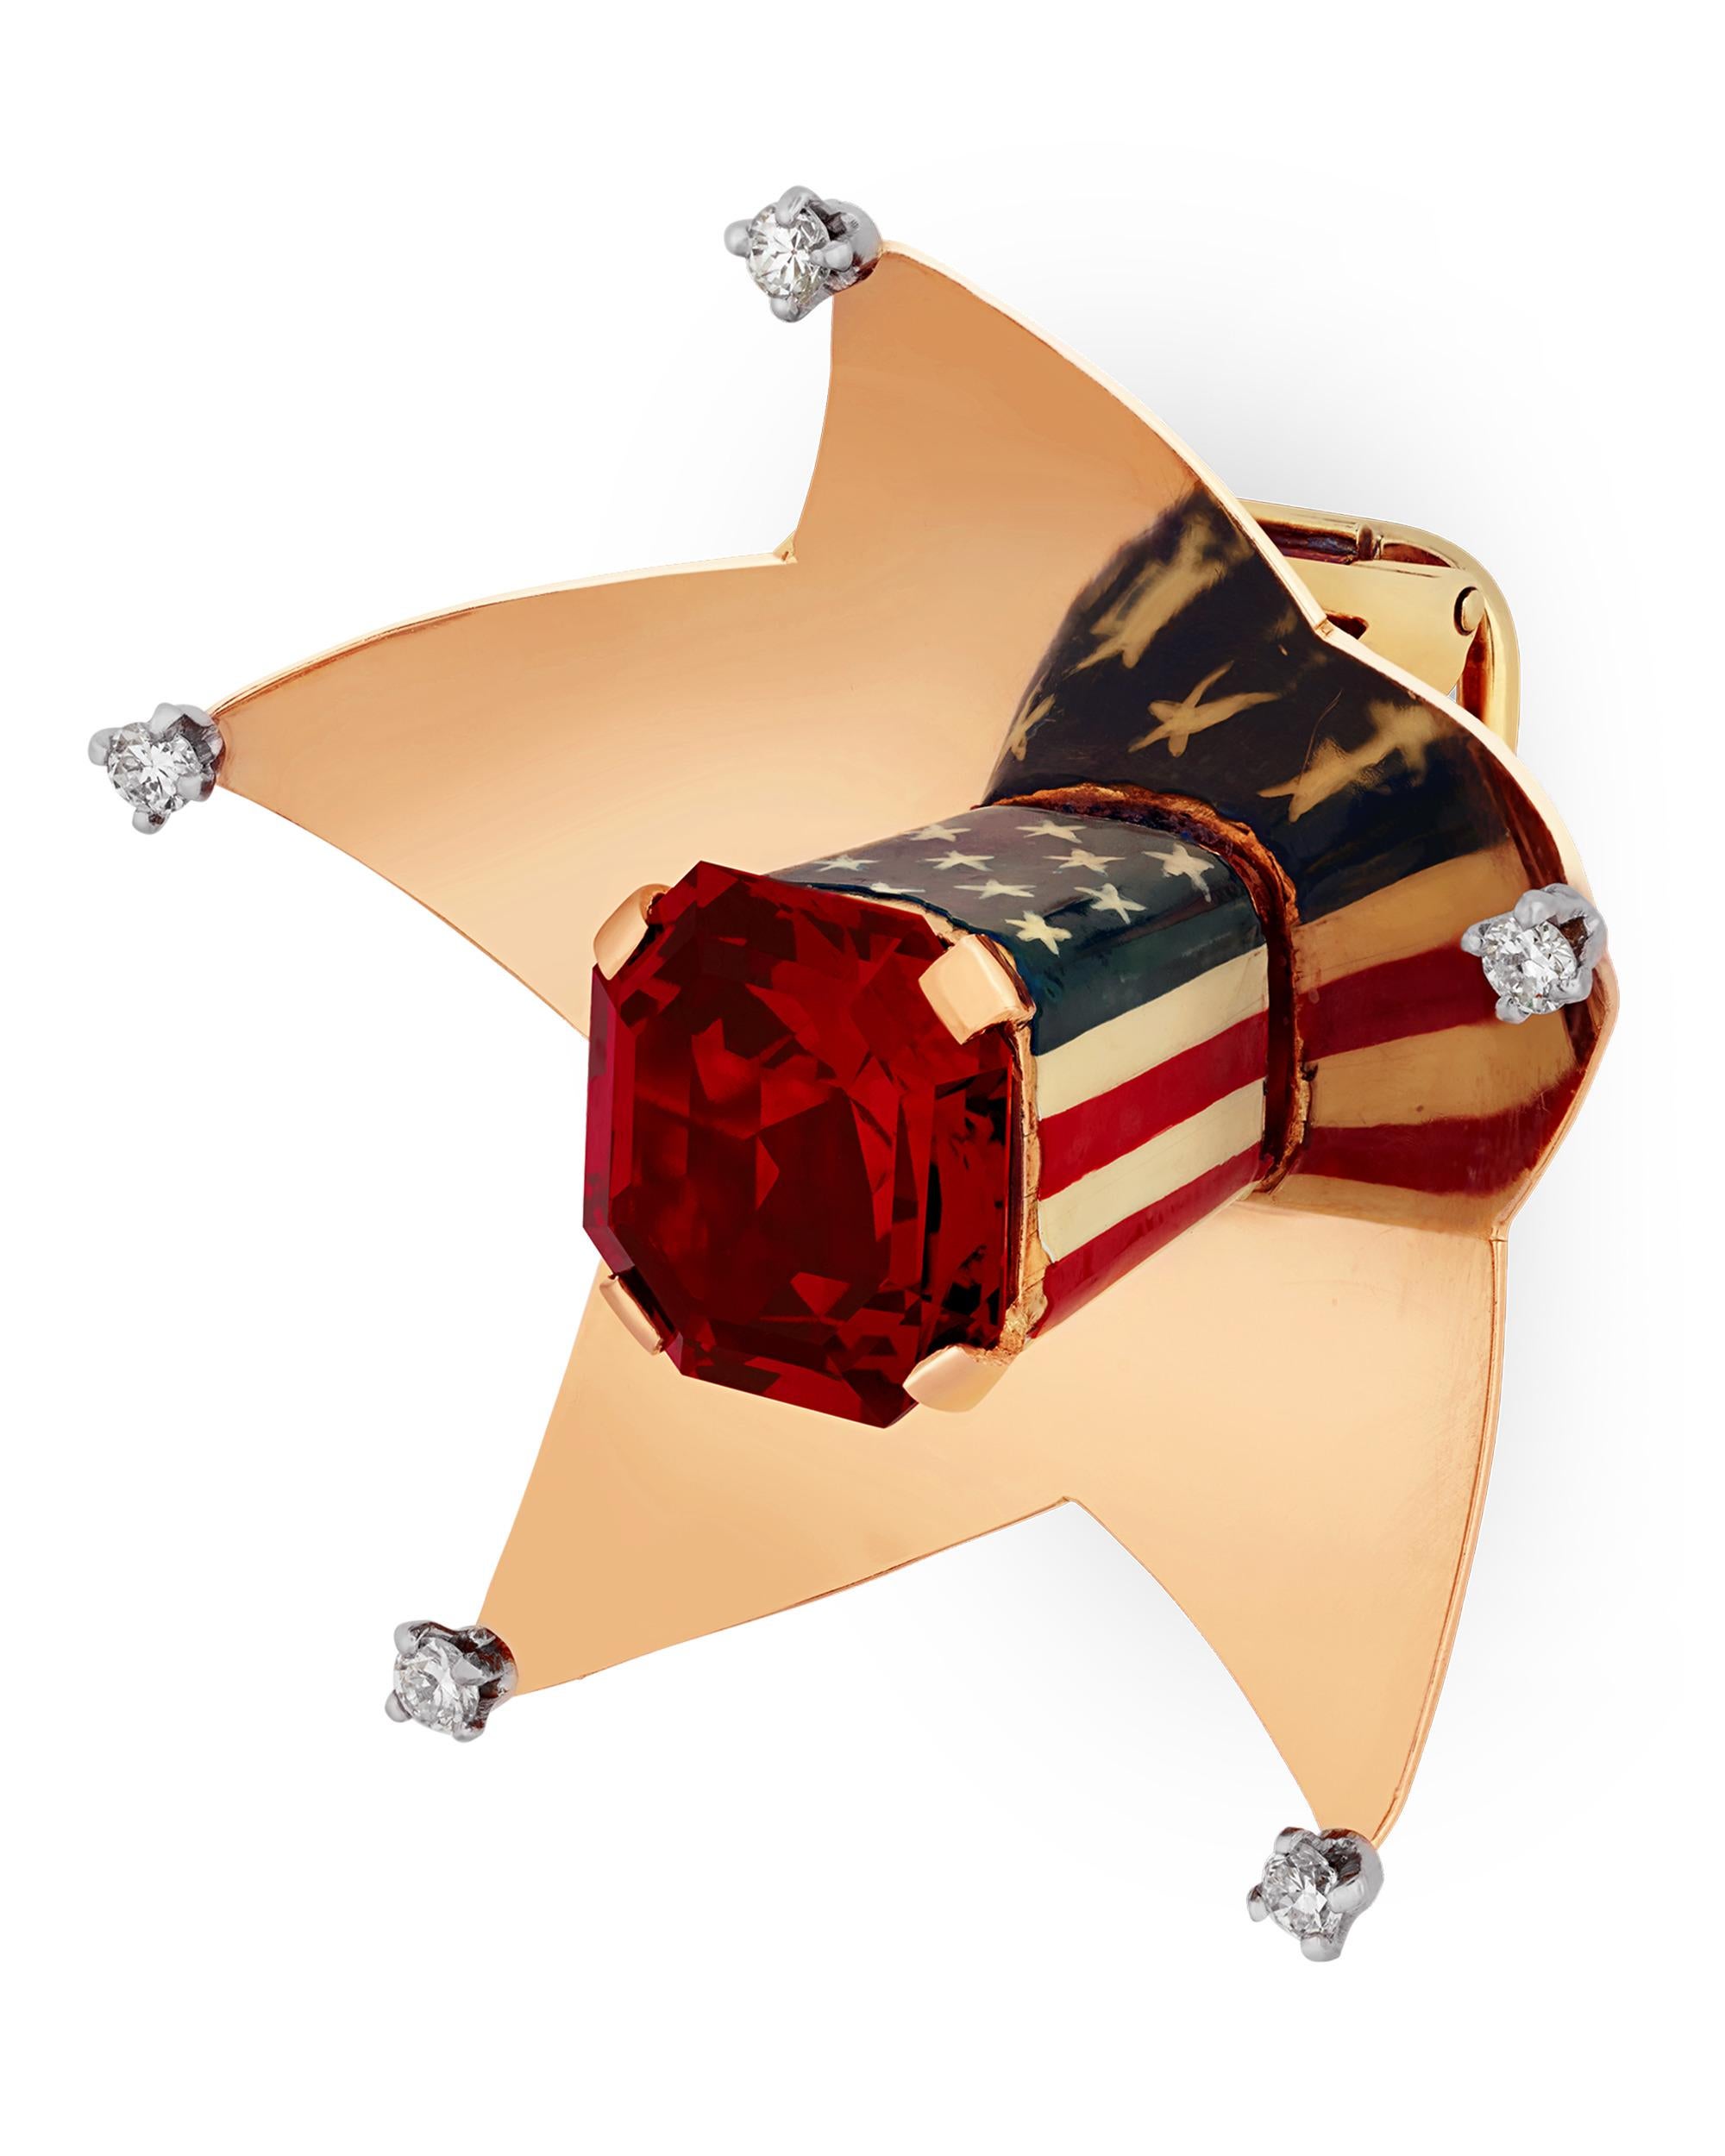 Bursting with patriotism, this original Cartier Home Front clip brooch features a 6.35-carat crimson spinel. Cartier's patented and illusory design gives the appearance of an American flag reflecting on the gold star-shaped body. The